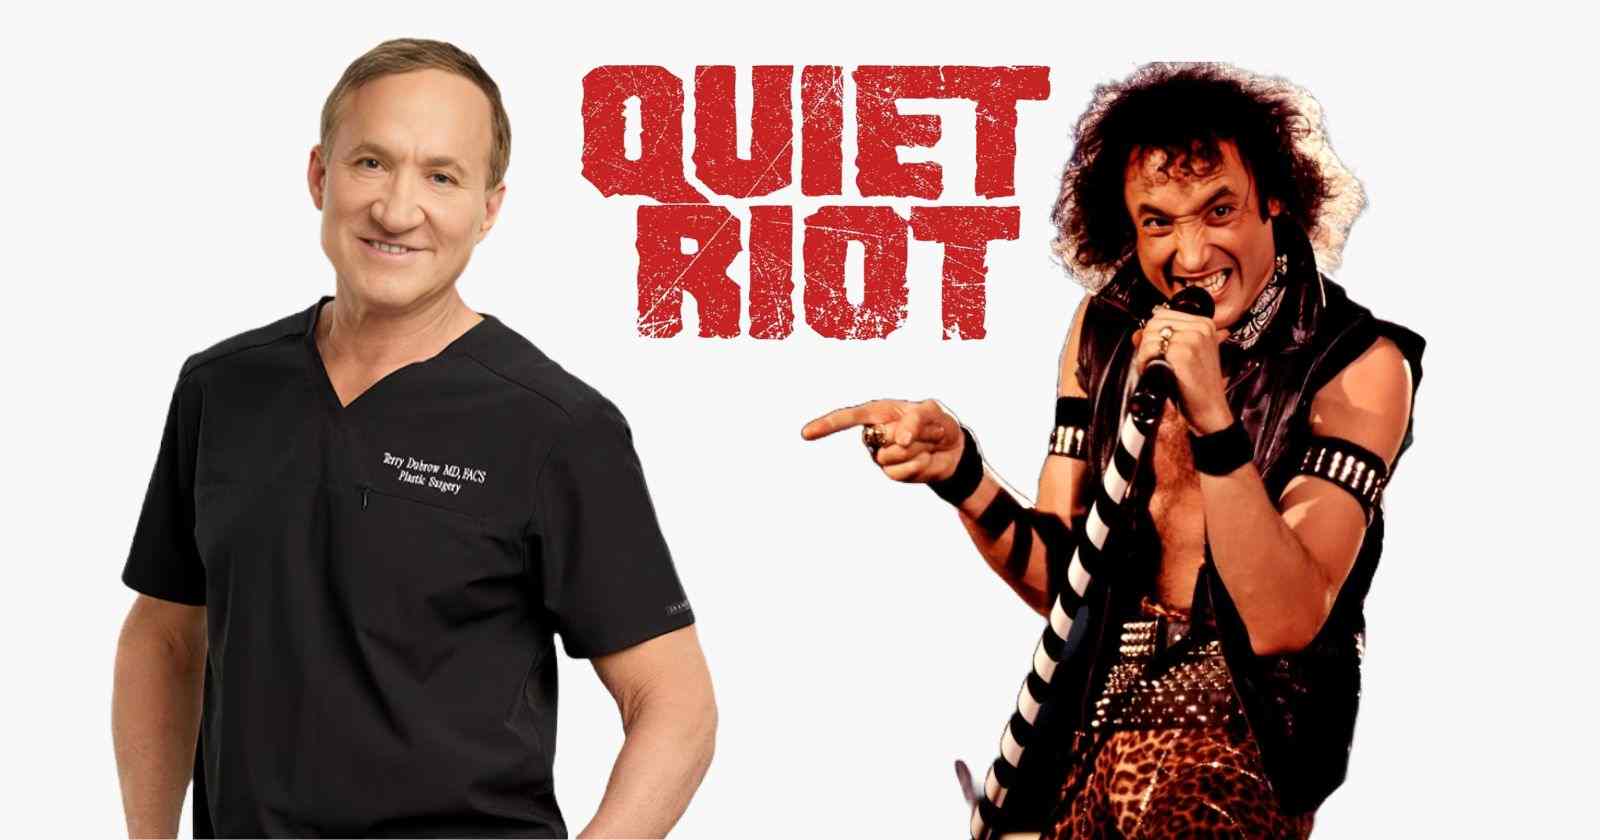 Terry DuBrow and his late brother Kevin Dubrow from Quiet Riot